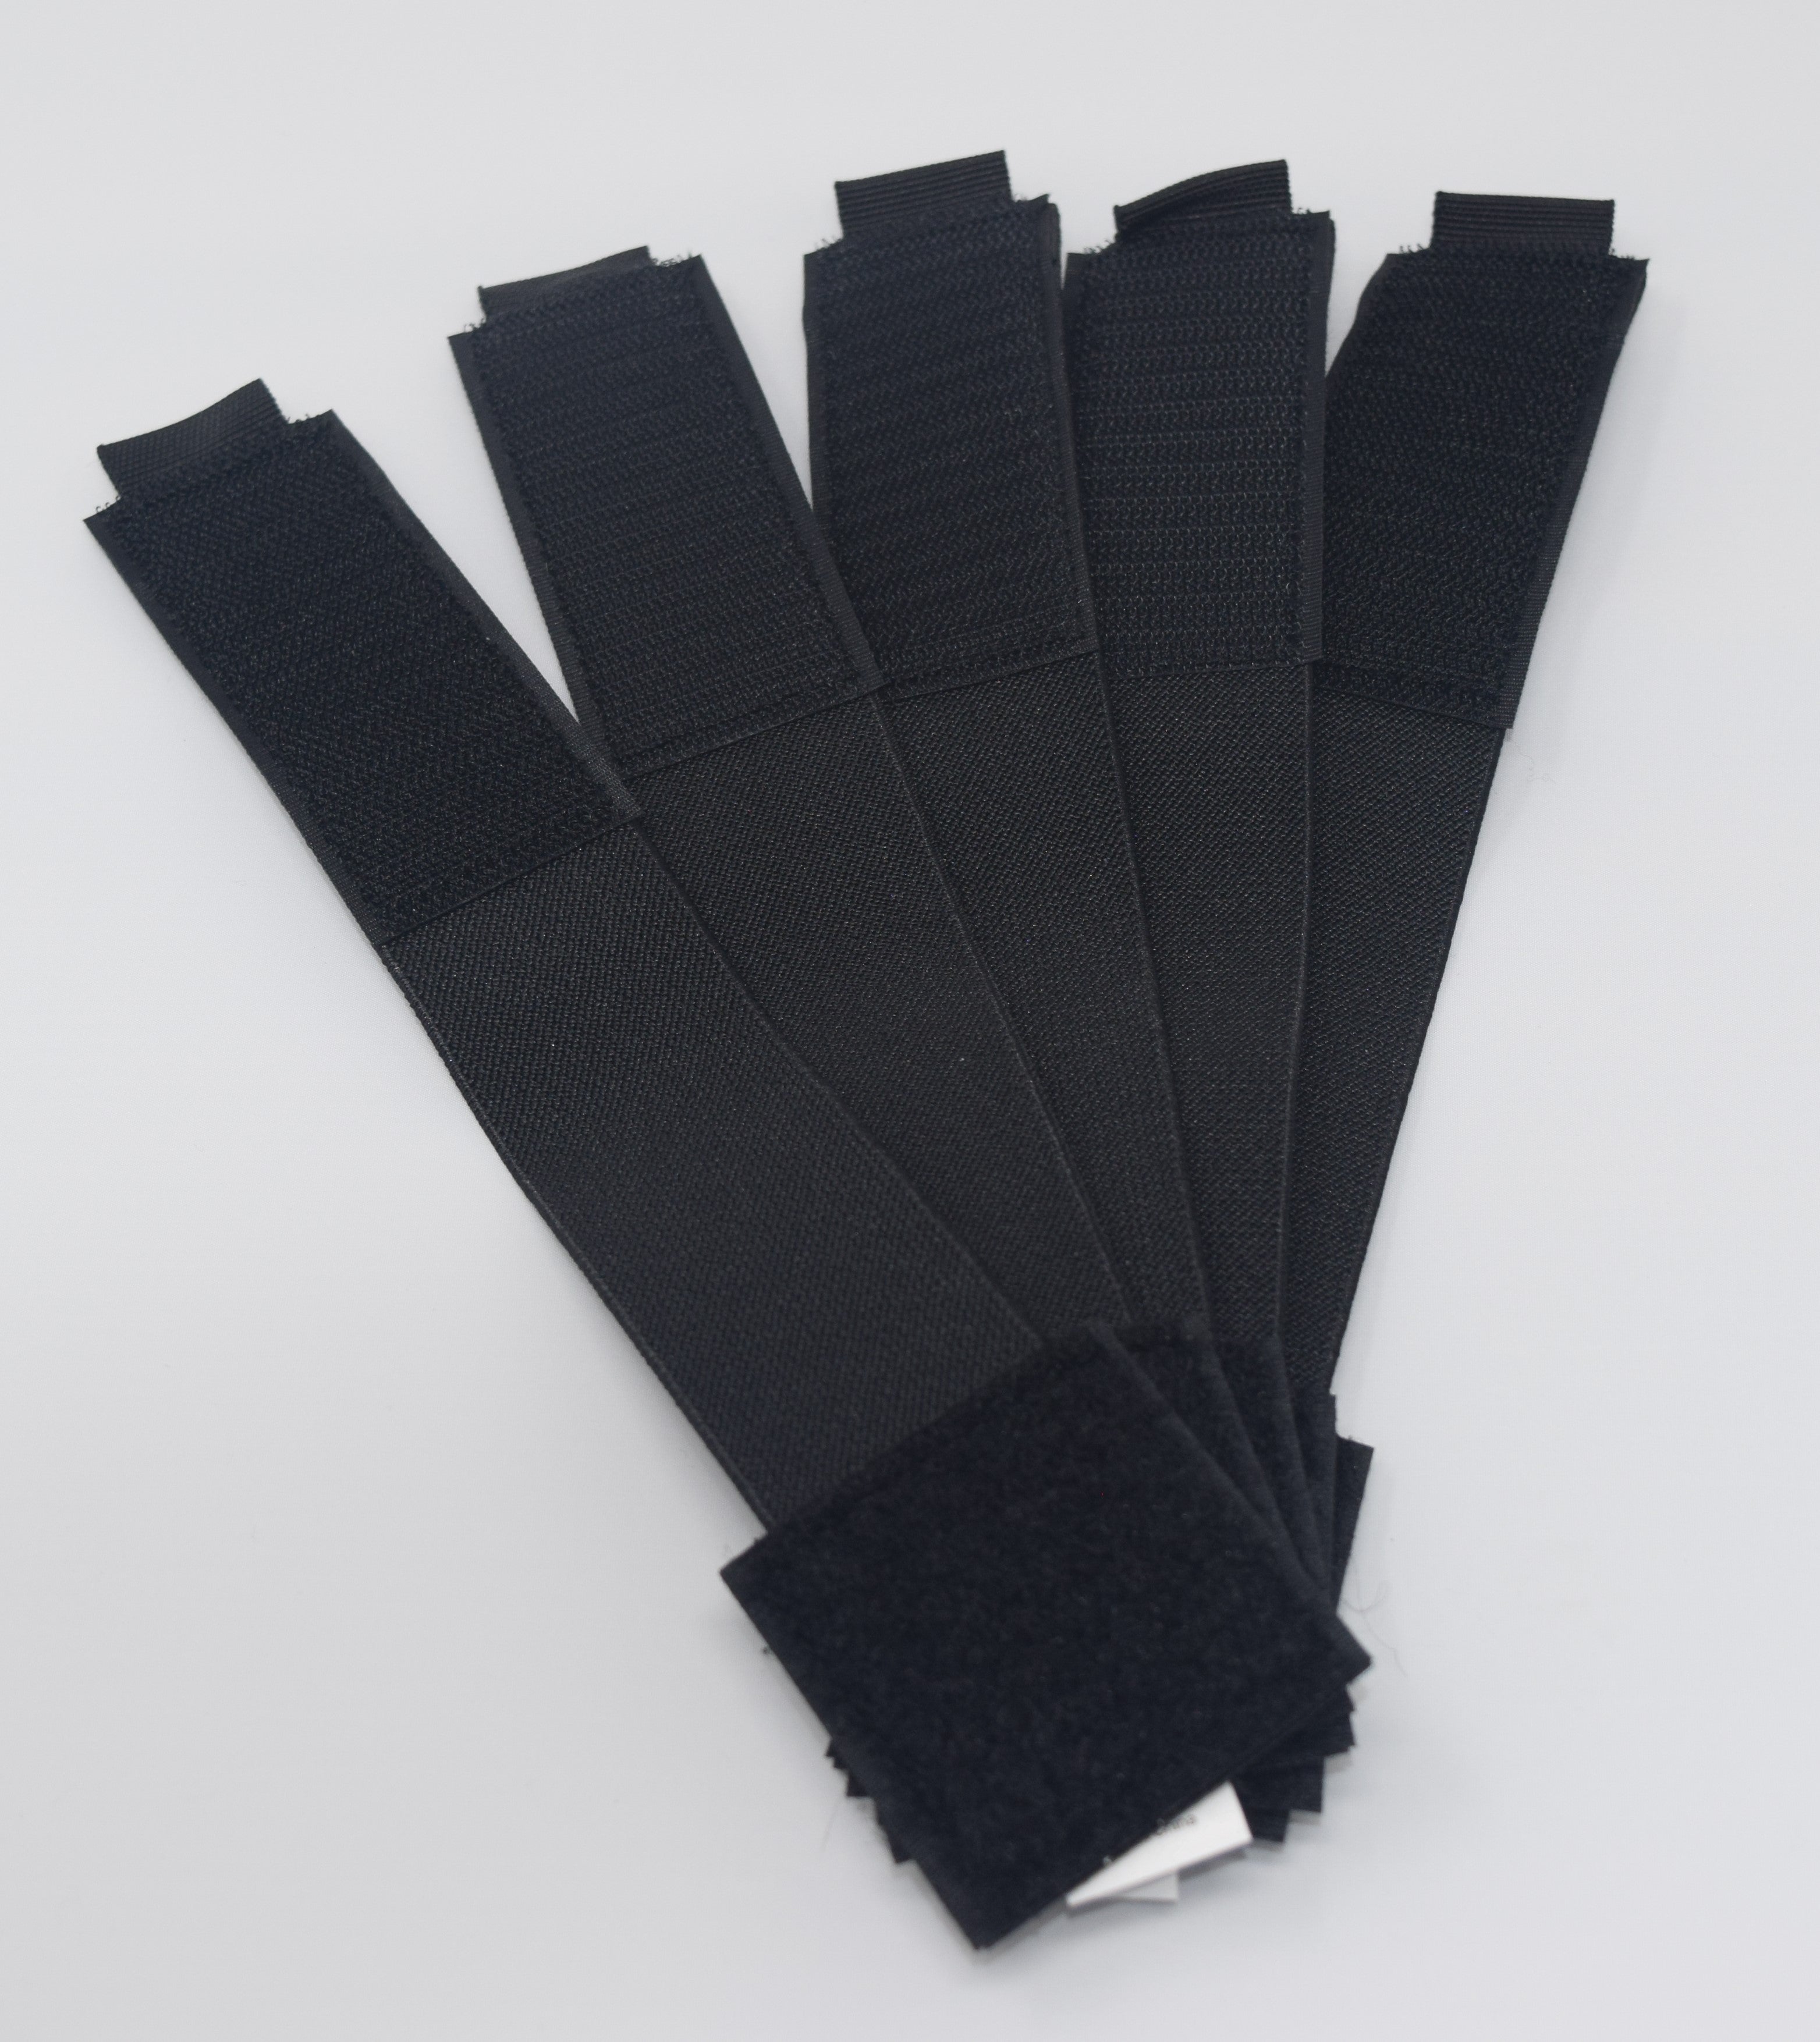 Kinetic Modular Pack - Elastic Pod Straps (5 per a package